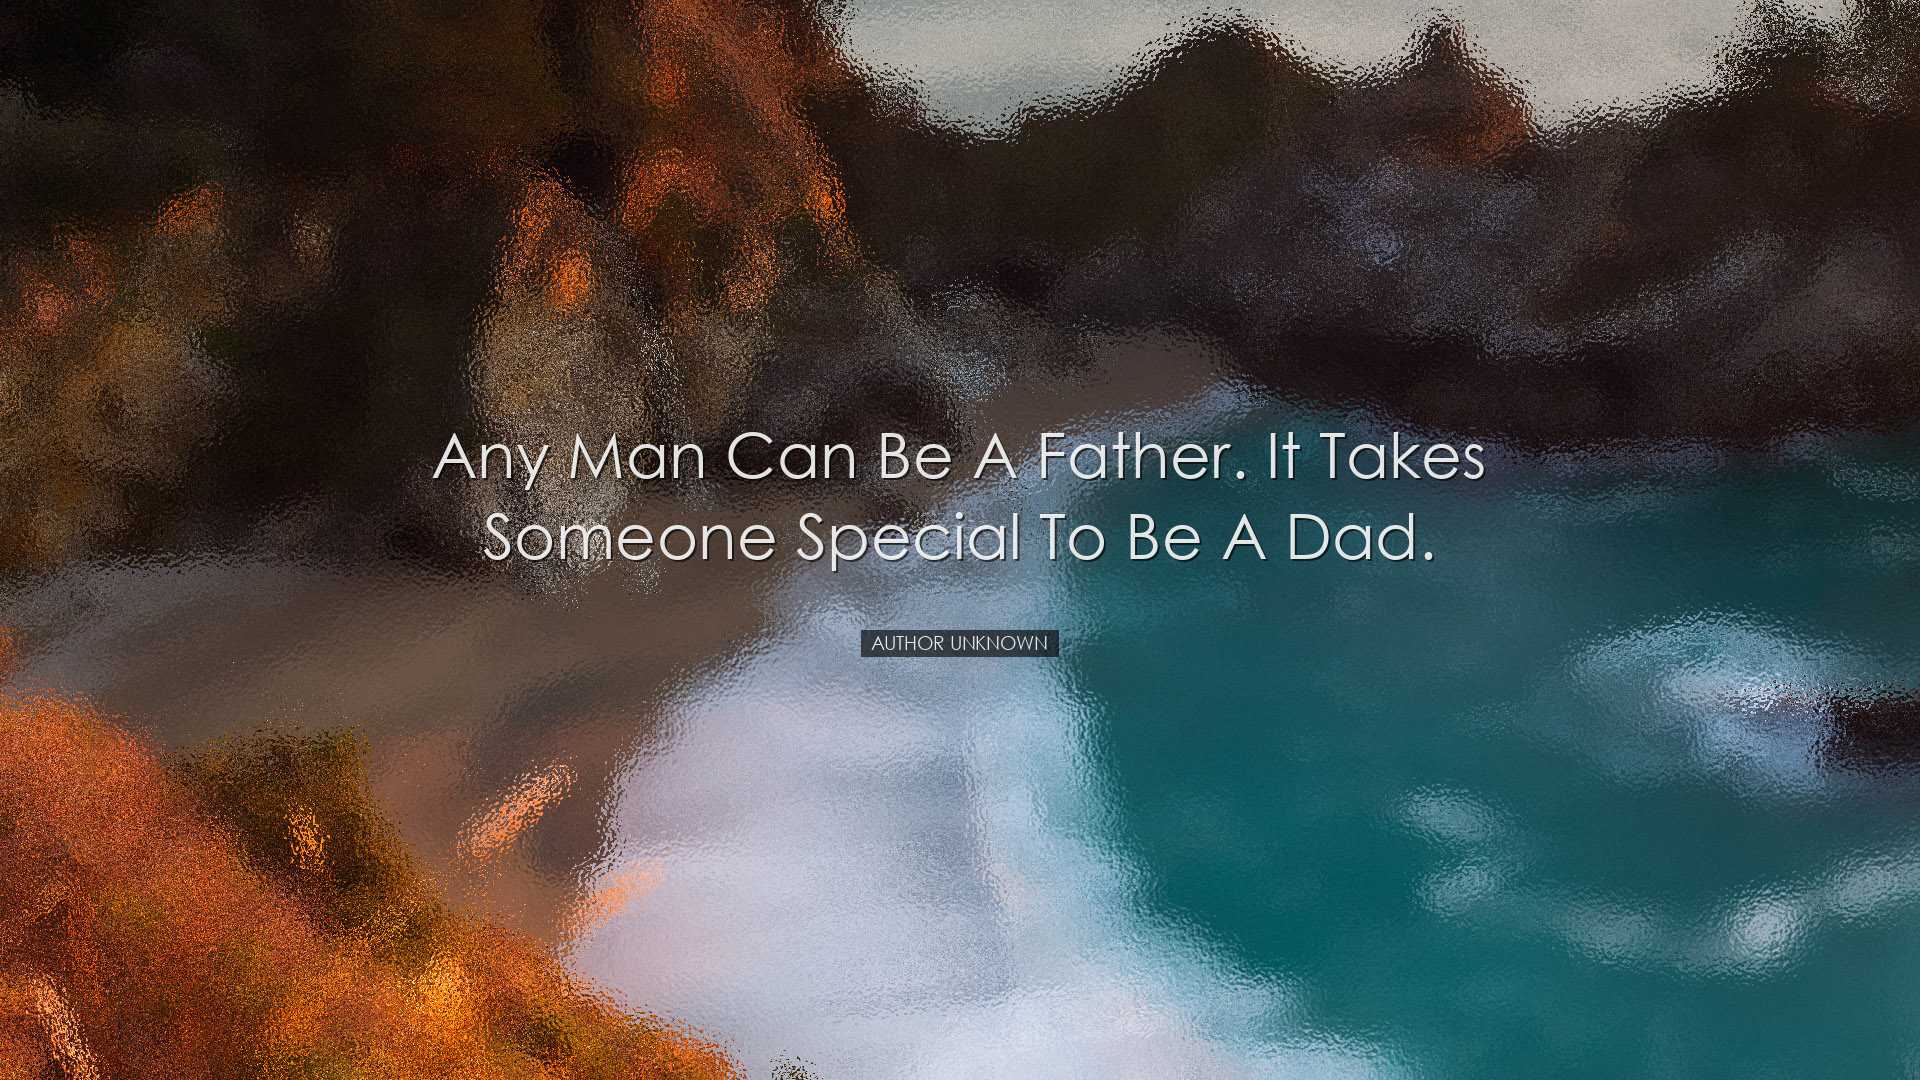 Any man can be a father. It takes someone special to be a dad. - A